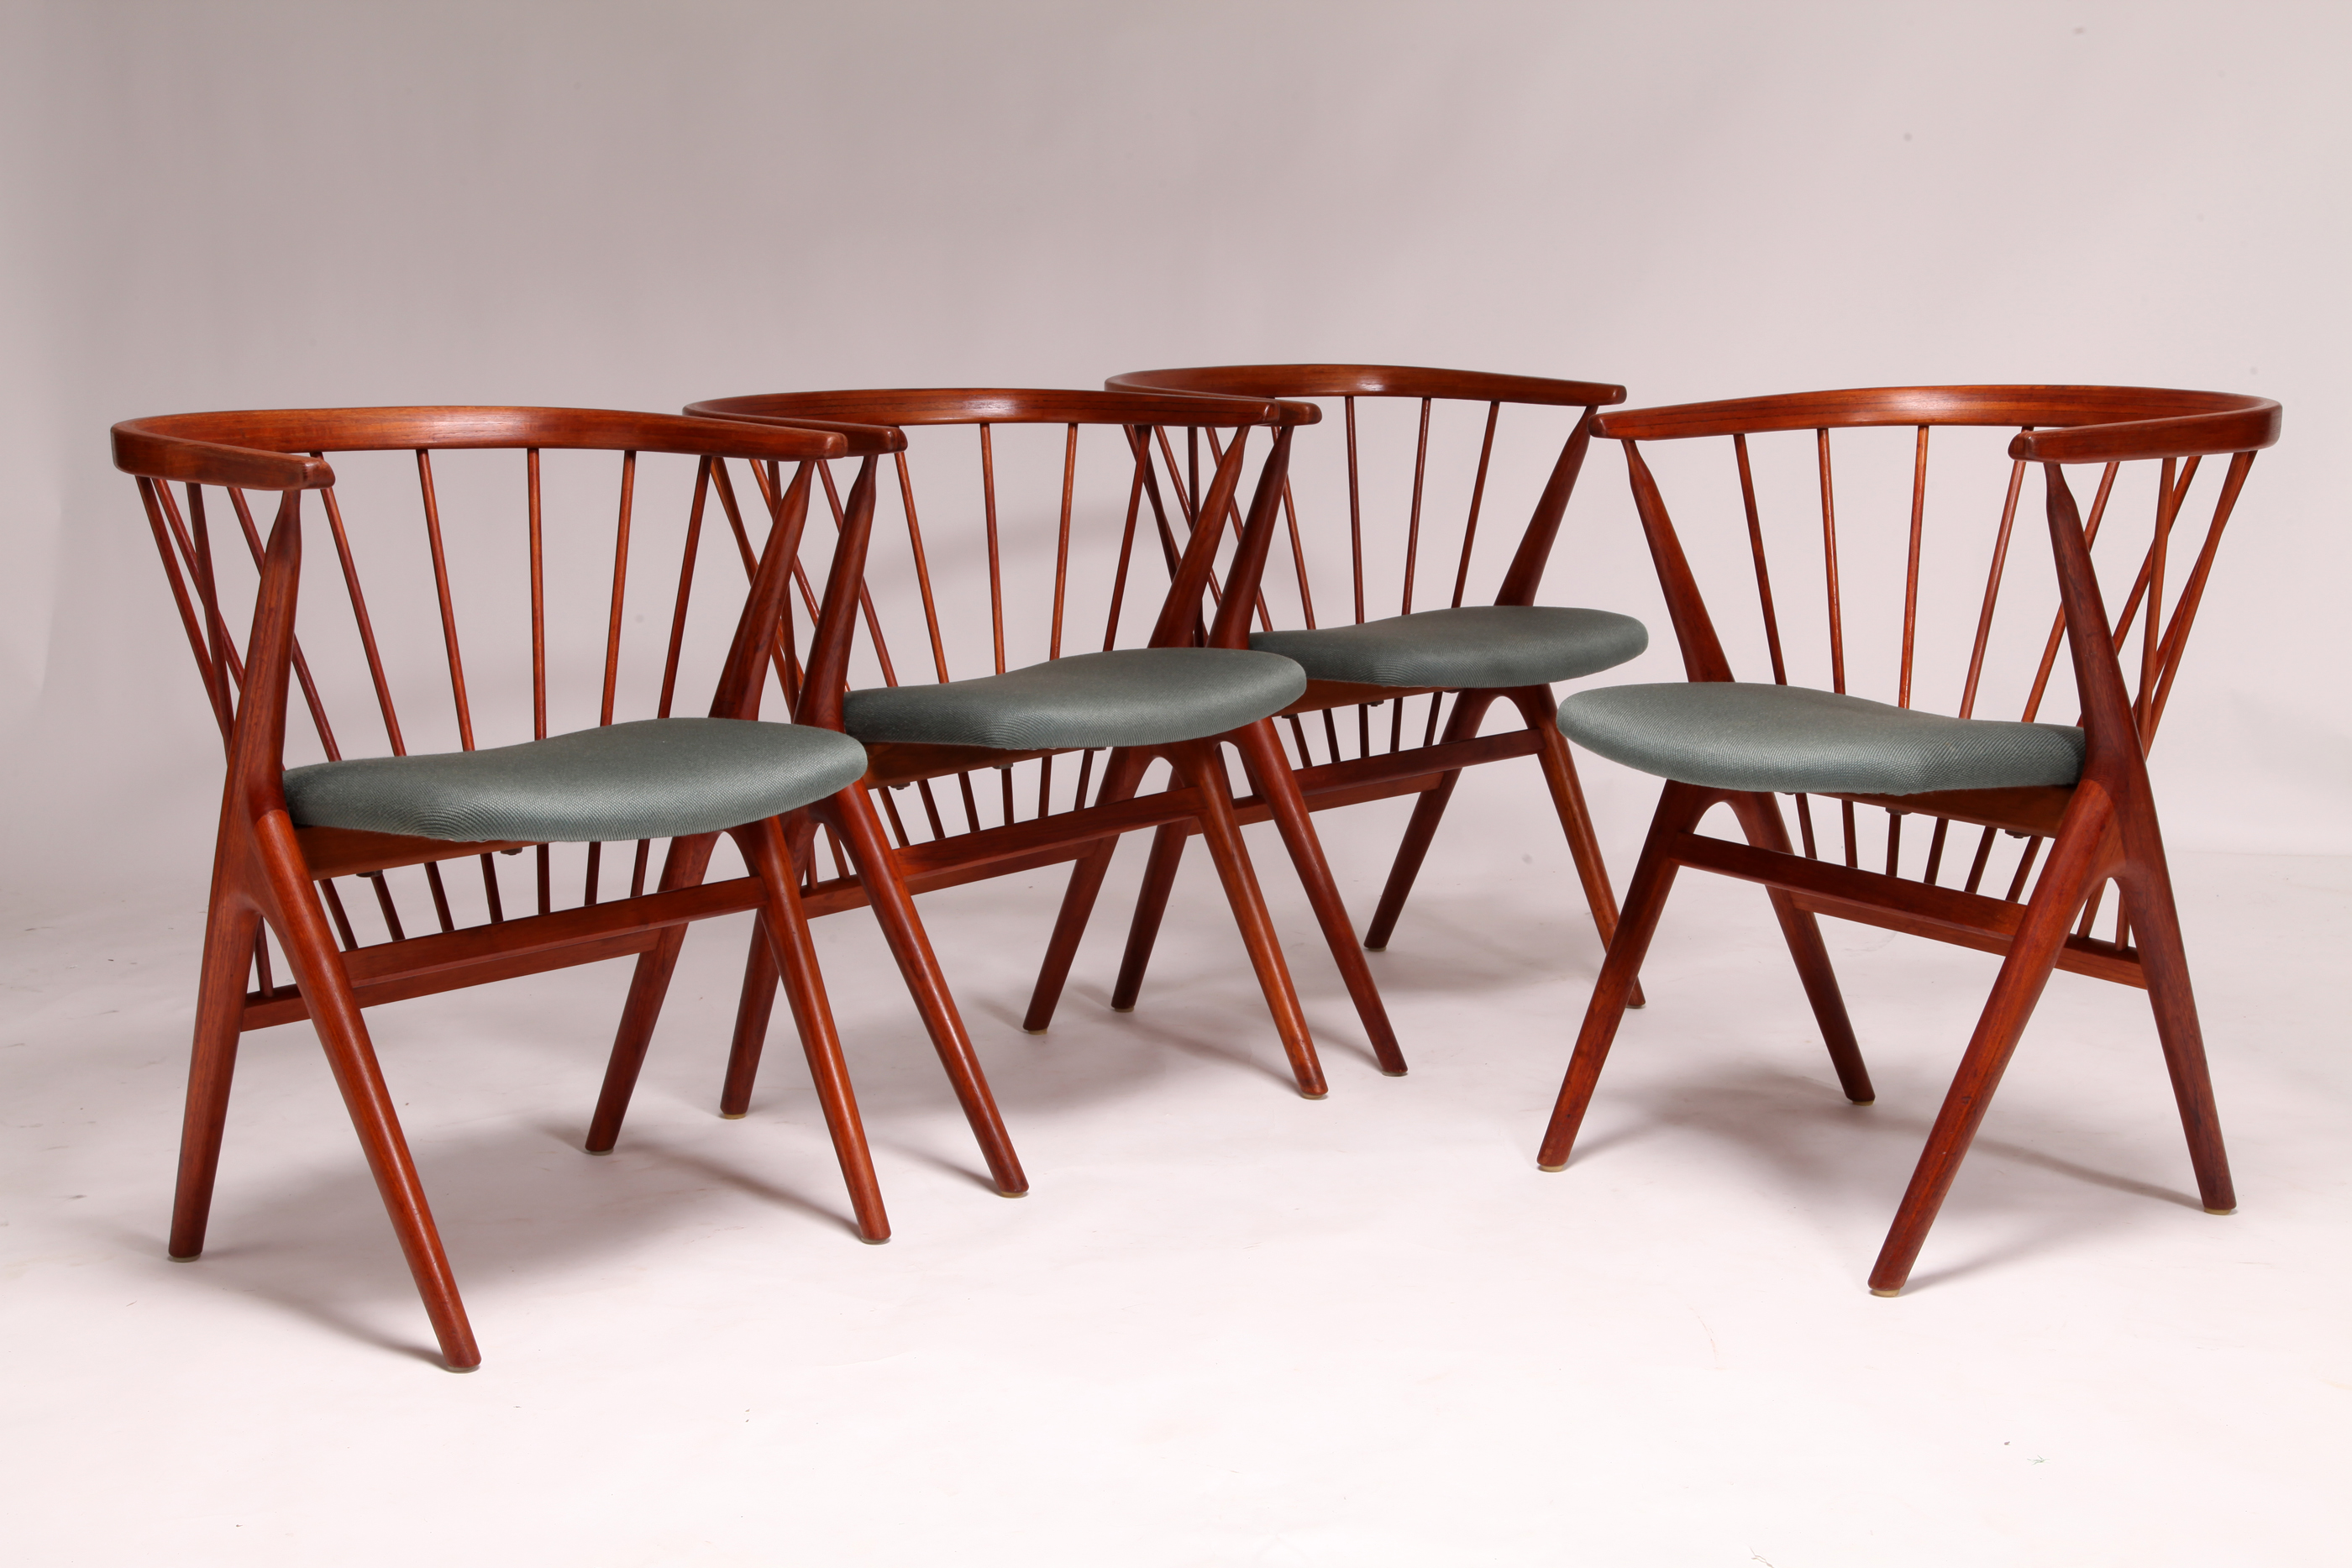 No. 8 dining chair in teak by Helge Sibast | Swanky Systems